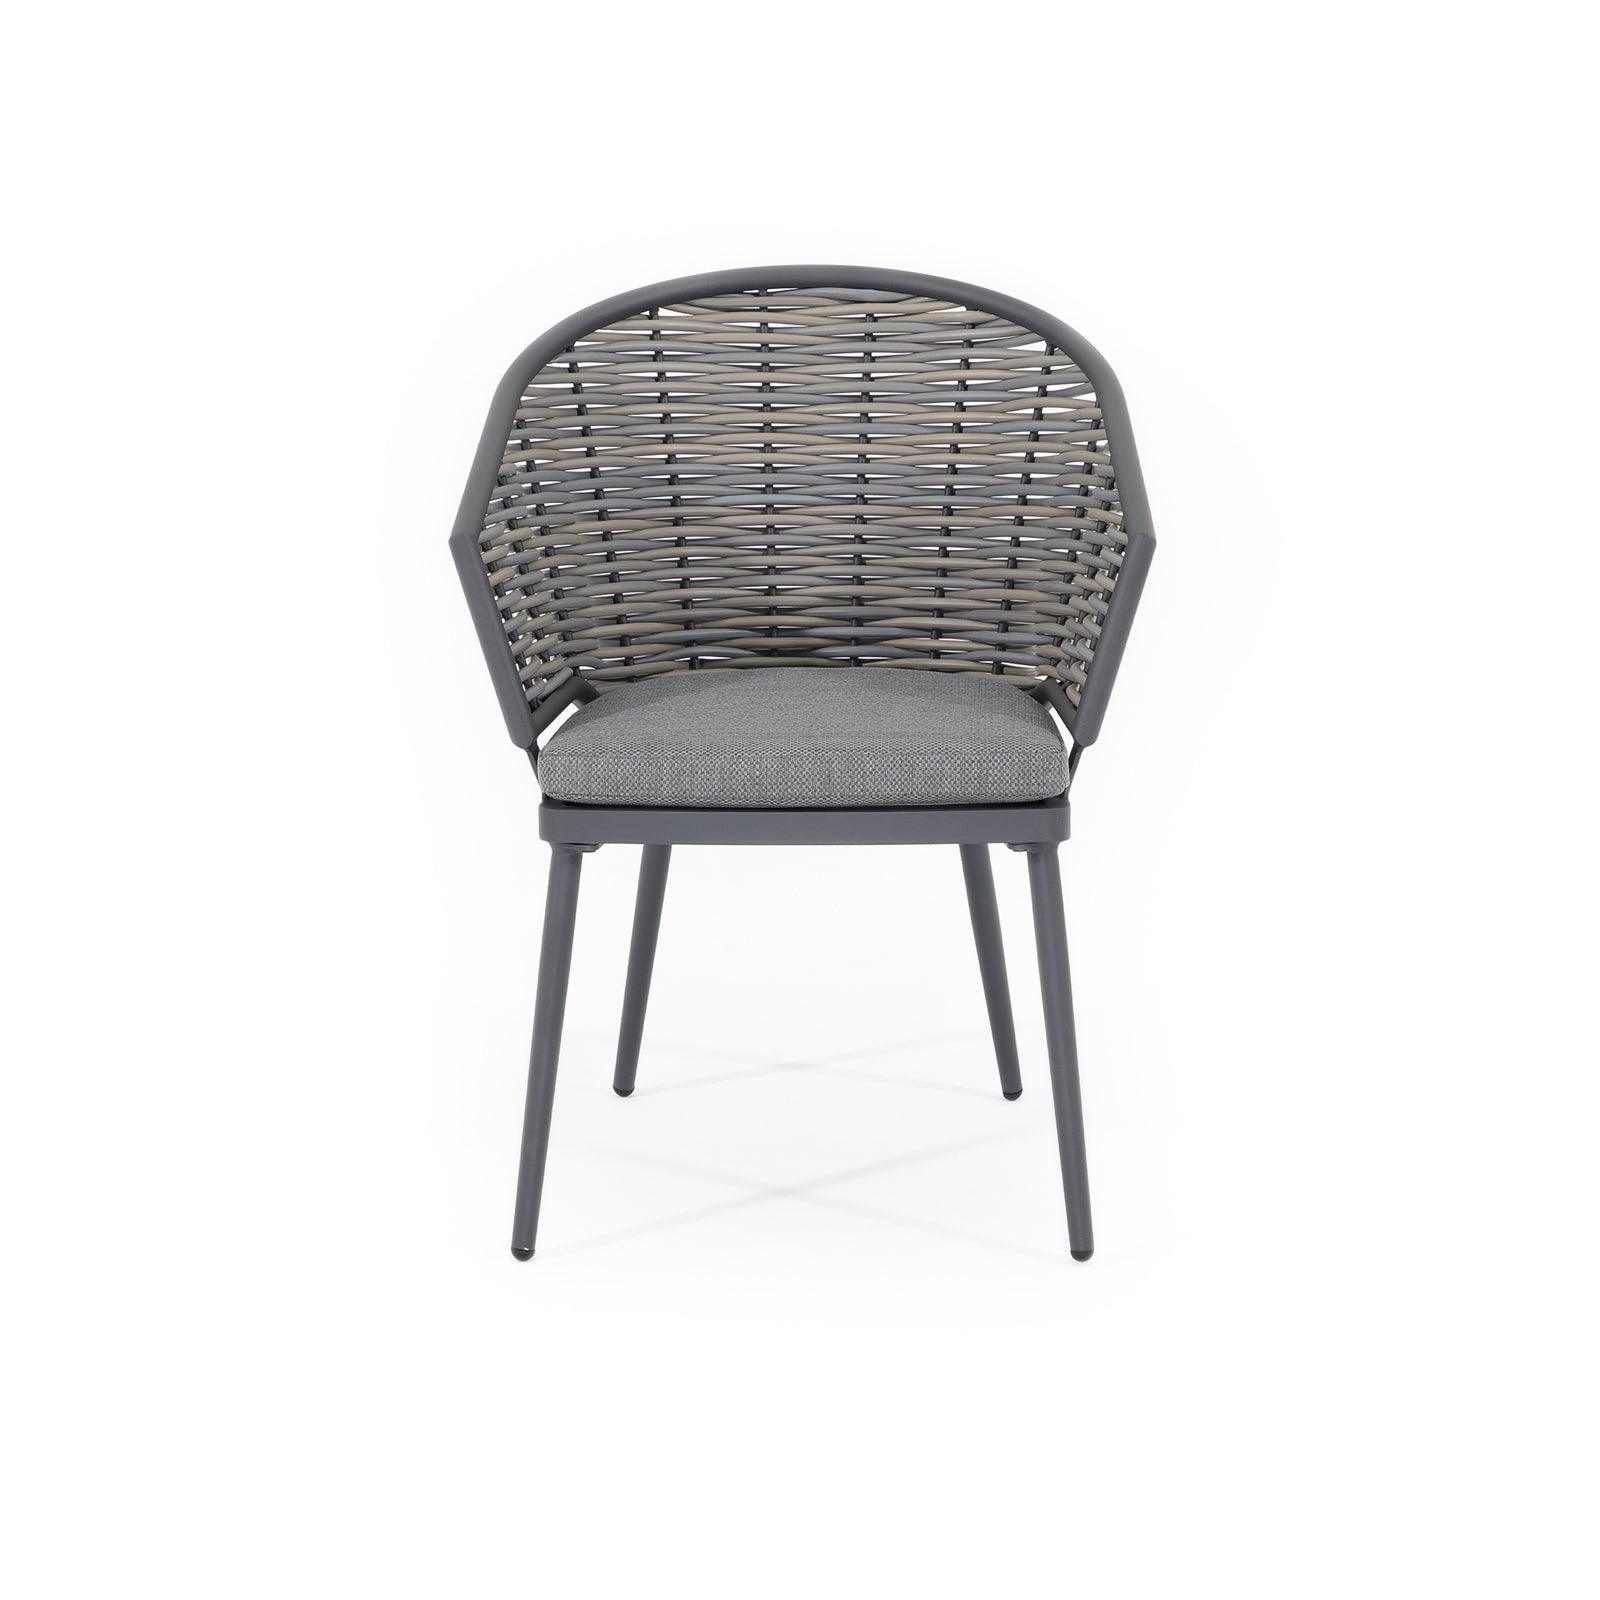 Burano Grey wicker outdoor Dining chairs with aluminum frame, grey cushions, front - Jardina Furniture - 1